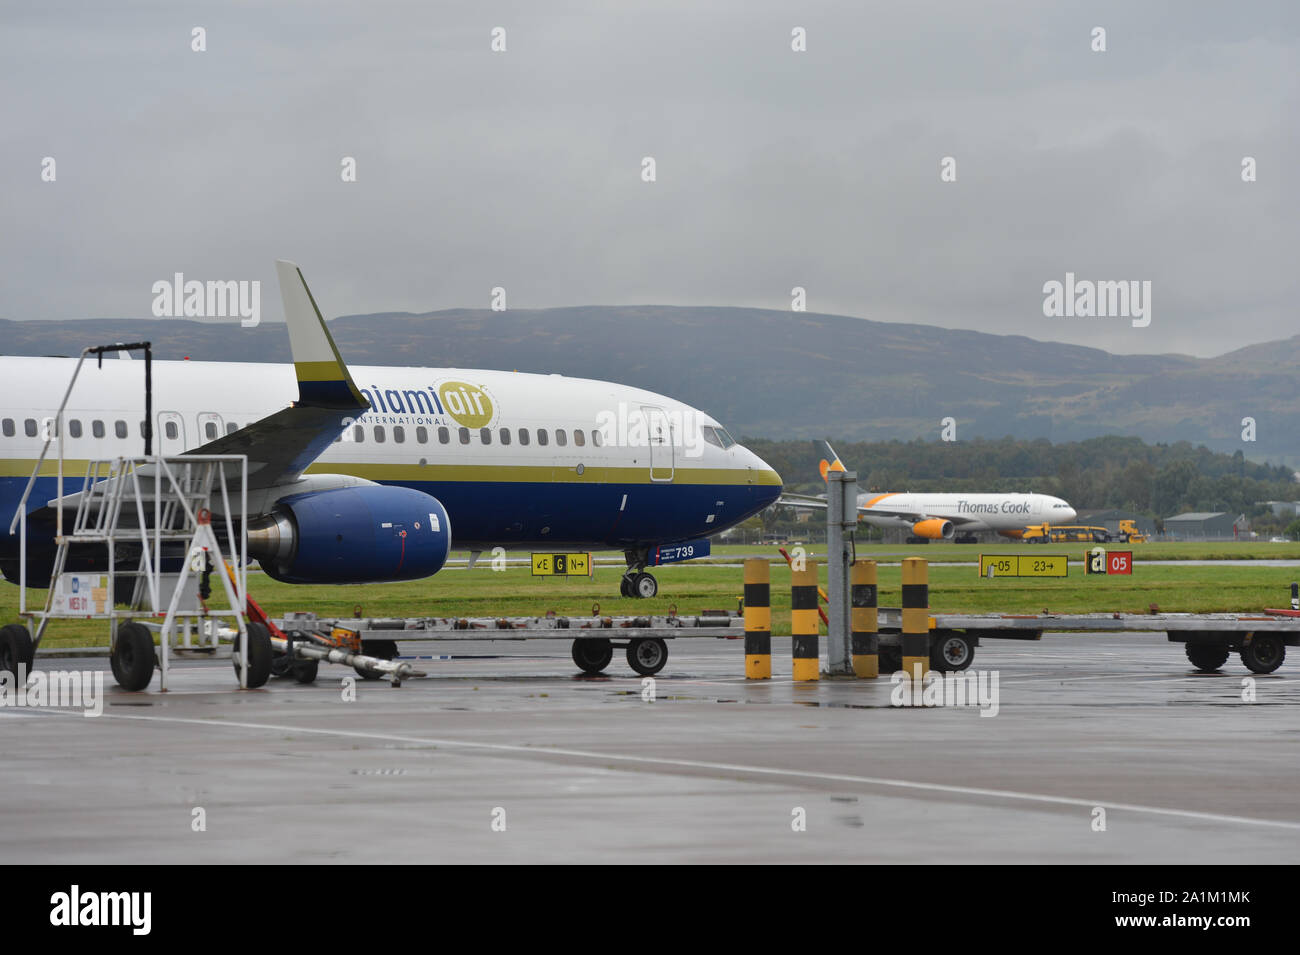 Glasgow, UK. 27th Sep, 2019. Following the immediate fallout from the collapsed tour company Thomas Cook, Operation Matterhorn is still in full flight at Glasgow Airport. Miami Air Boeing 737-800 aircraft seen taking stranded passengers back from Spain and mainland Europe. Note: This aircraft was also used previously by the United States Government for transporting prisoners to and from the infamous Guantanamo Bay. Credit: Colin Fisher/Alamy Live News Credit: Colin Fisher/Alamy Live News Stock Photo